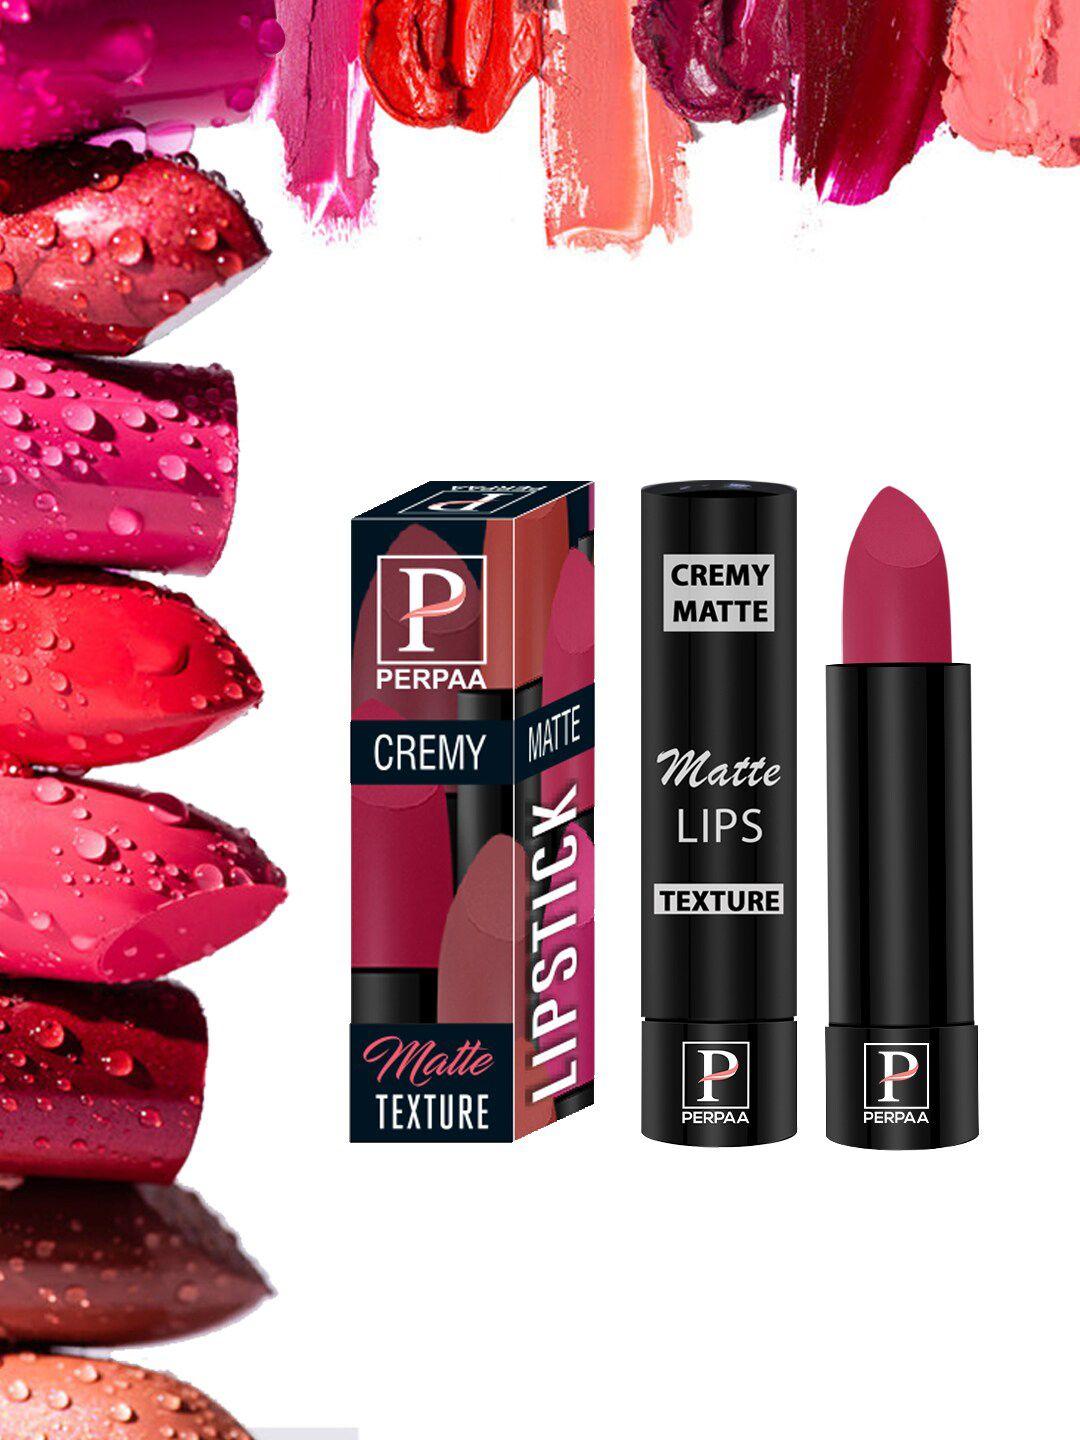 perpaa cremy long lasting matte texture bullet lipstick 3.5 g - strawberry pink 92